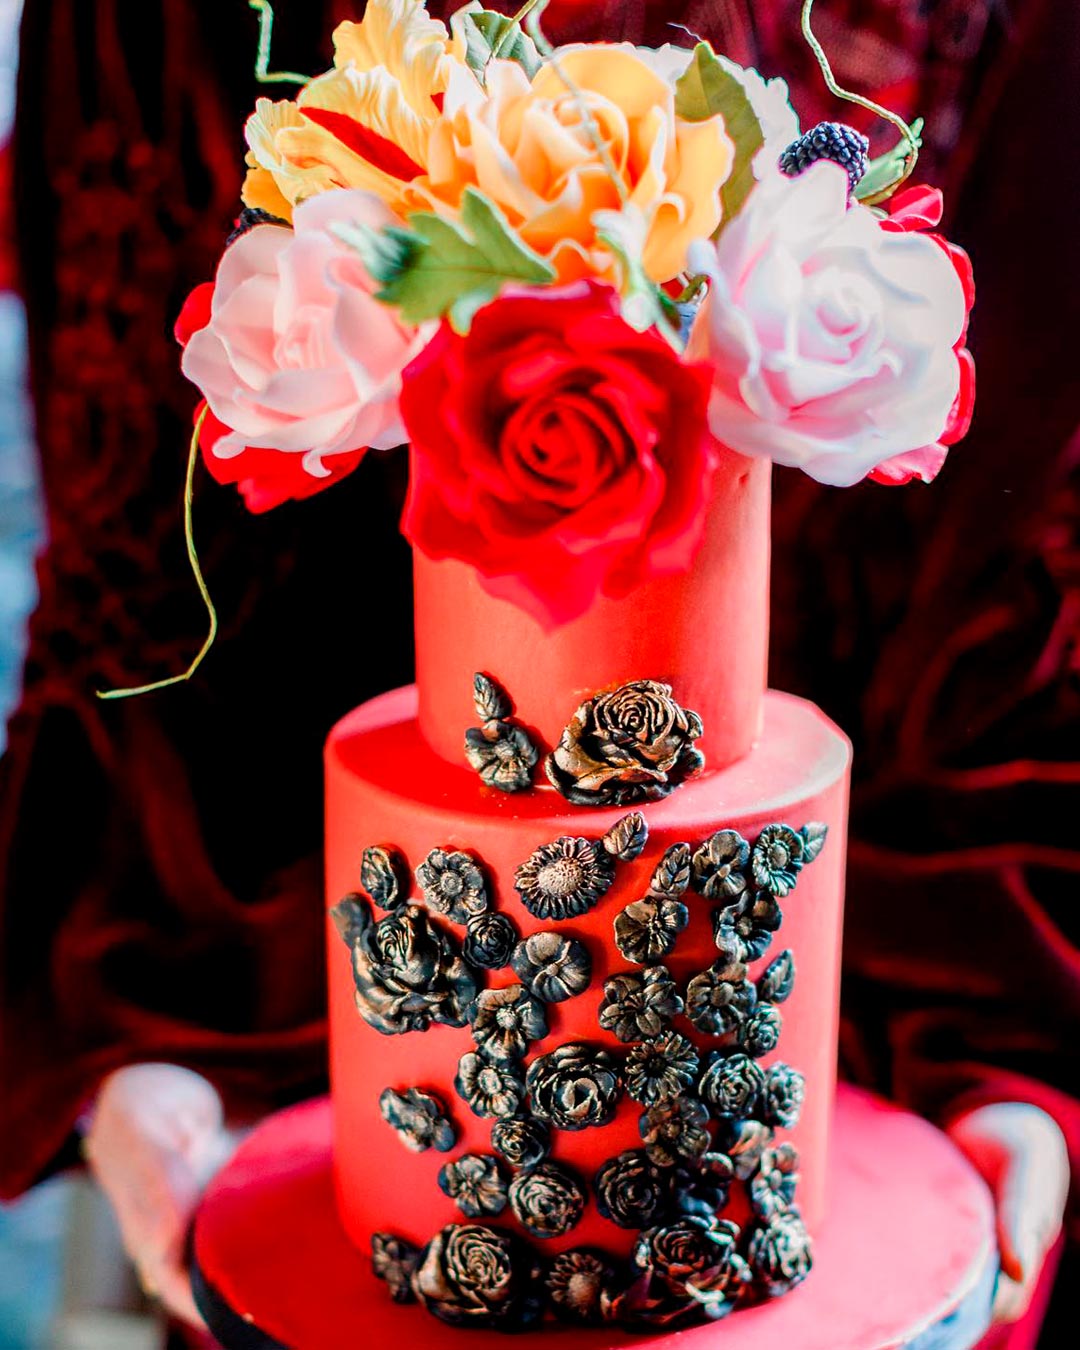 red and black wedding theme cake flowers roses